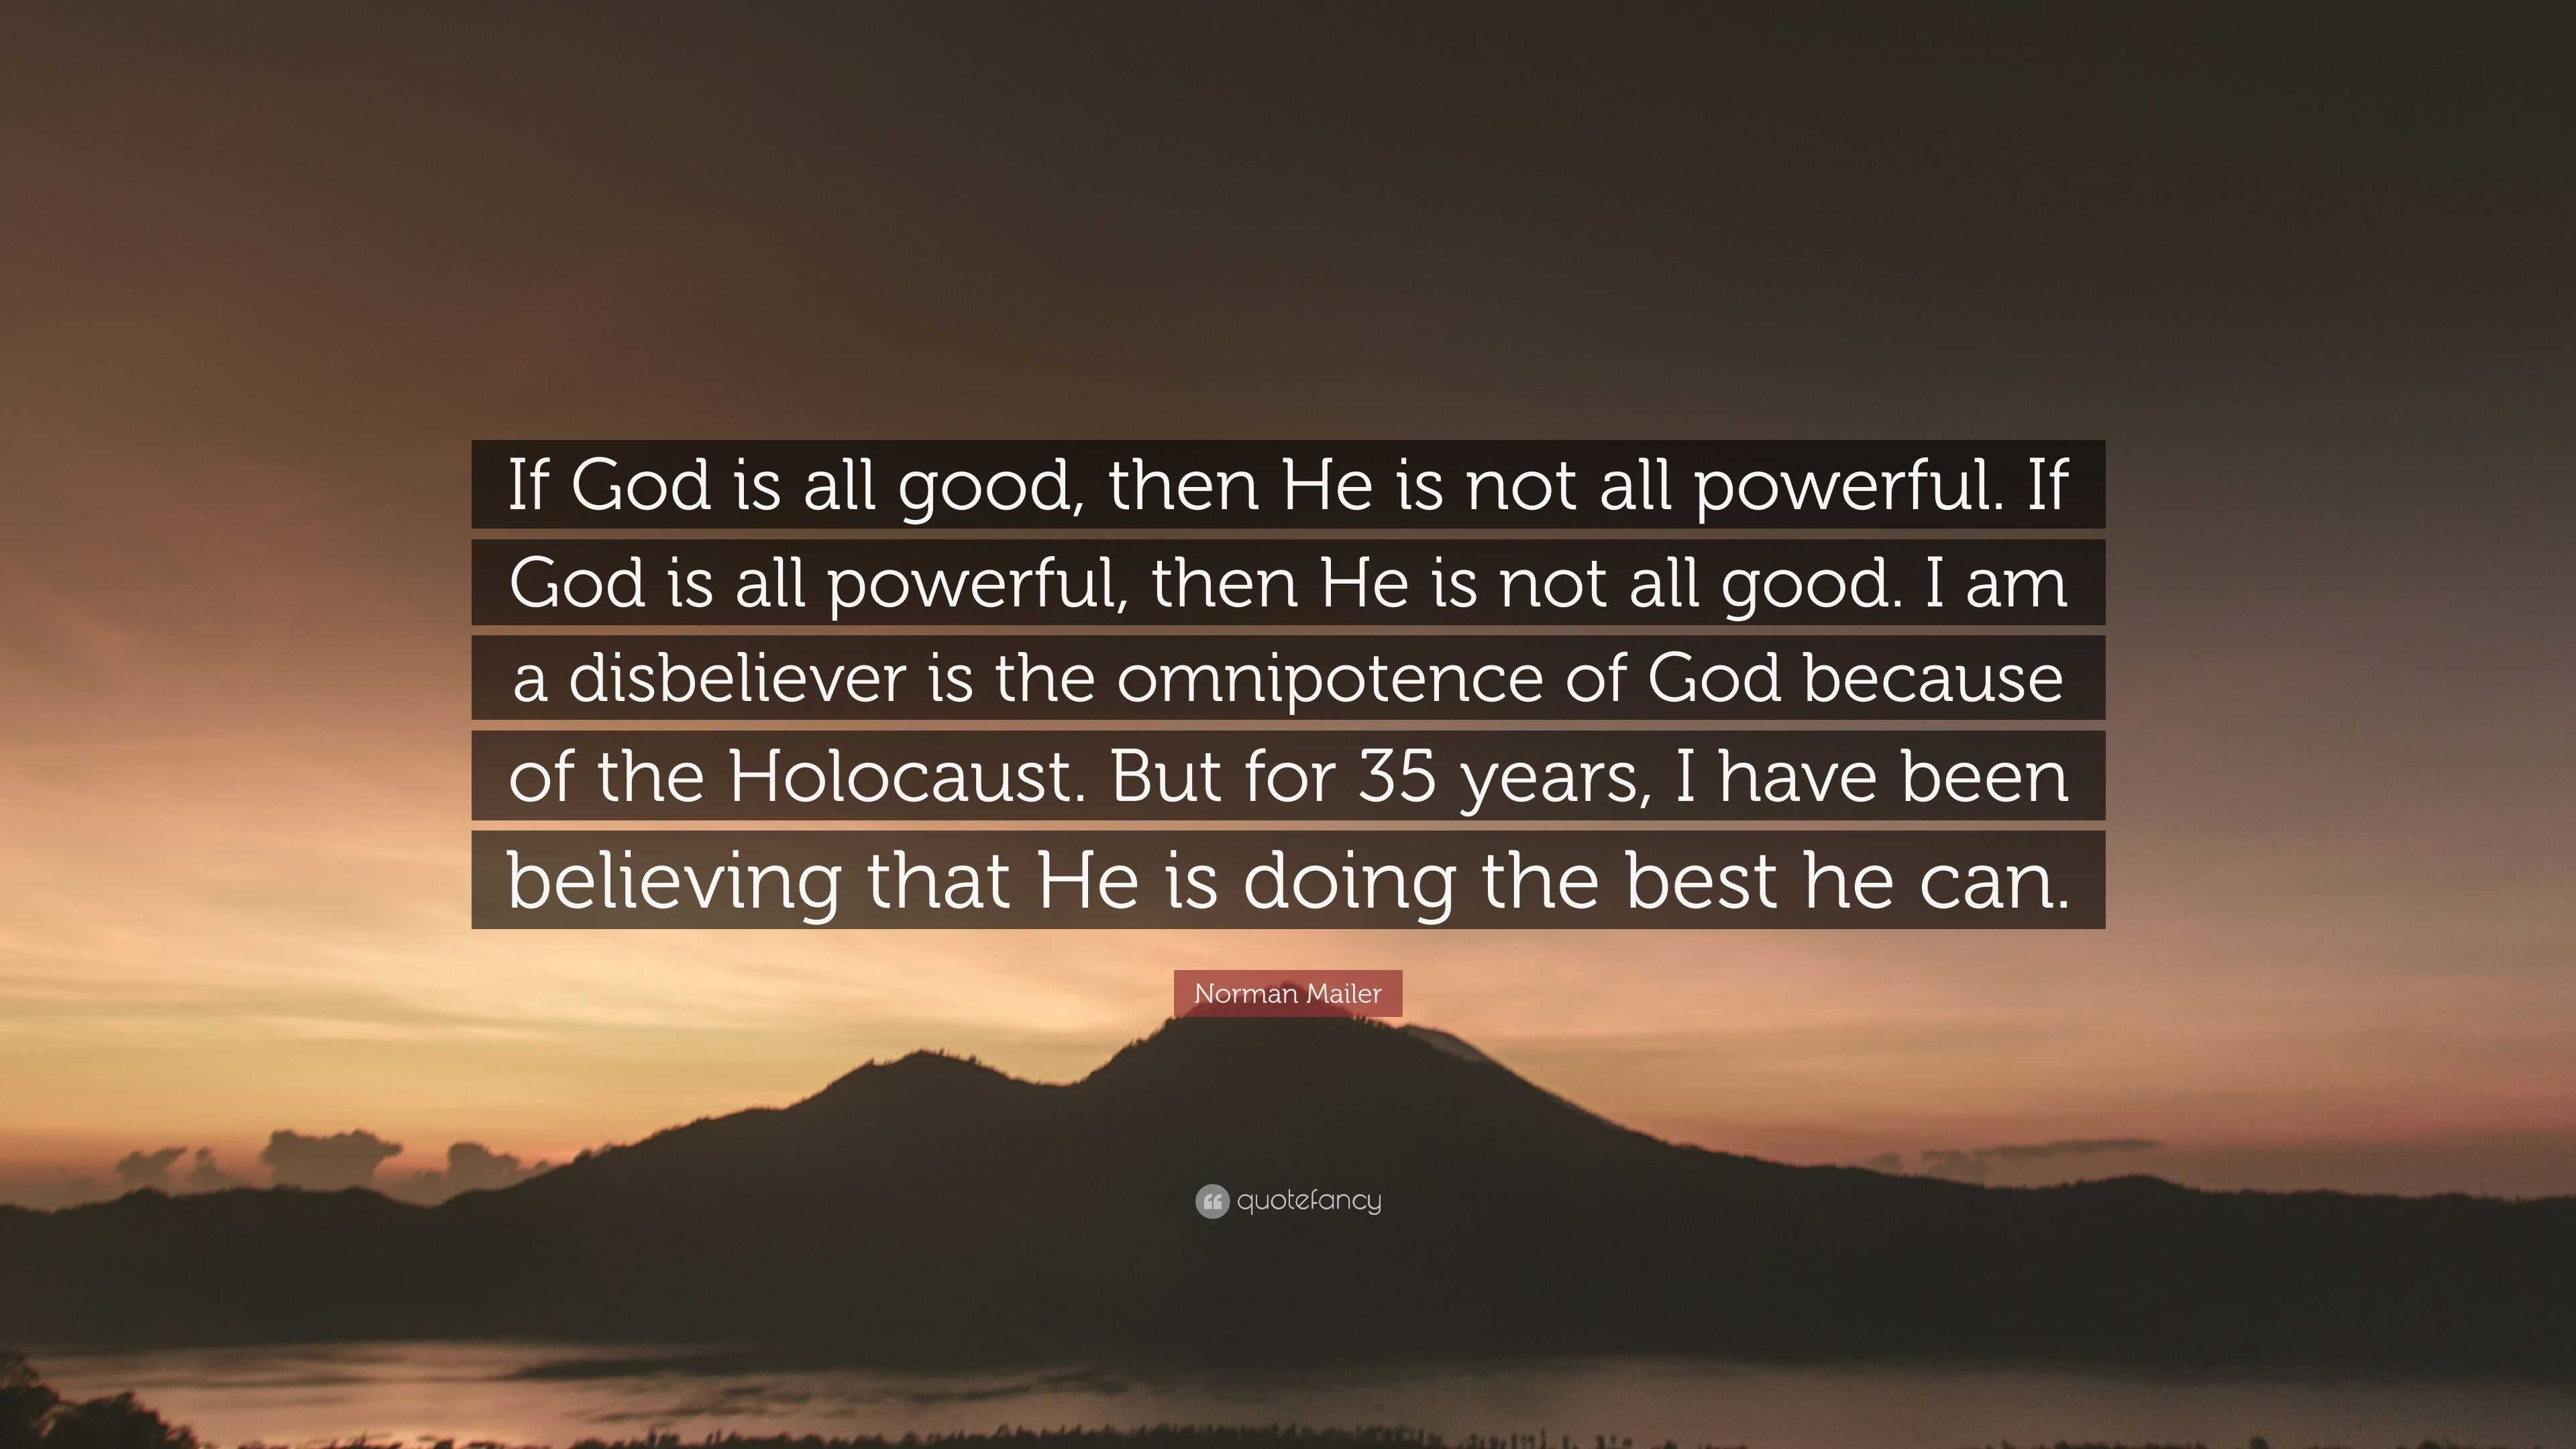 Norman Mailer Quote: “If God is all good, then He is not all powerful